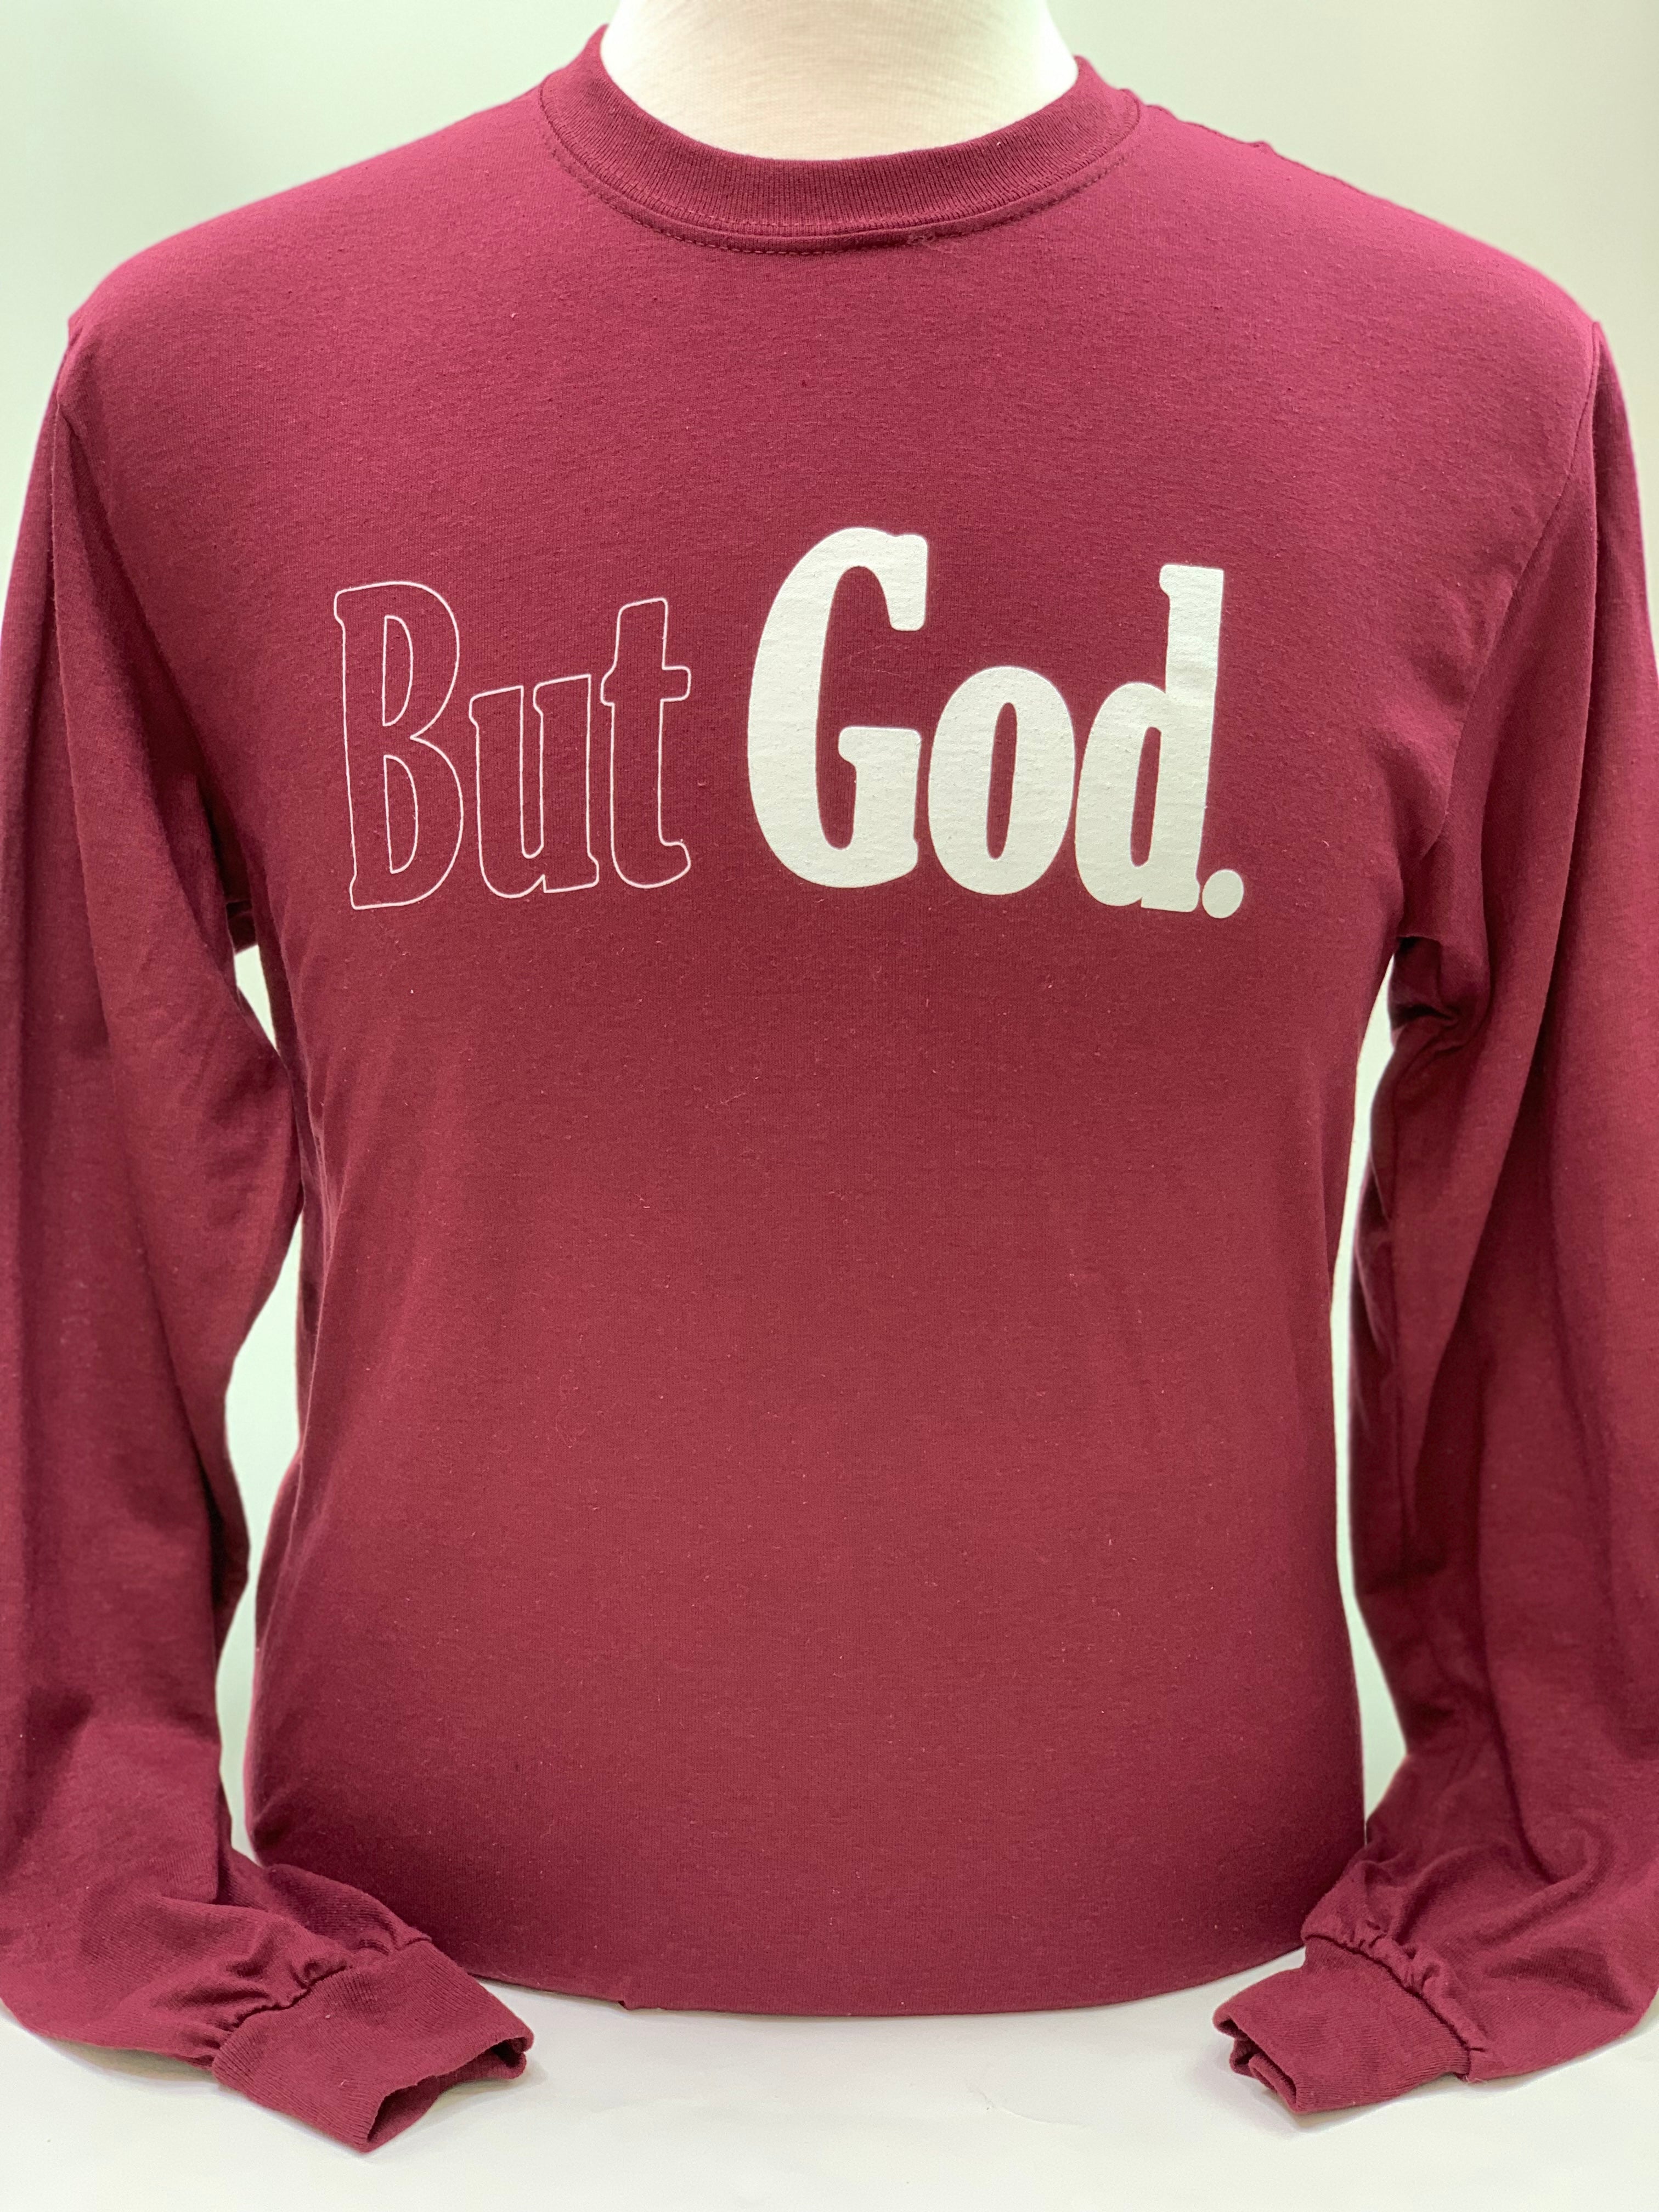 But God T-Shirt - Long Sleeve Whine & White - Jewellery Unique Gifts & Accessories